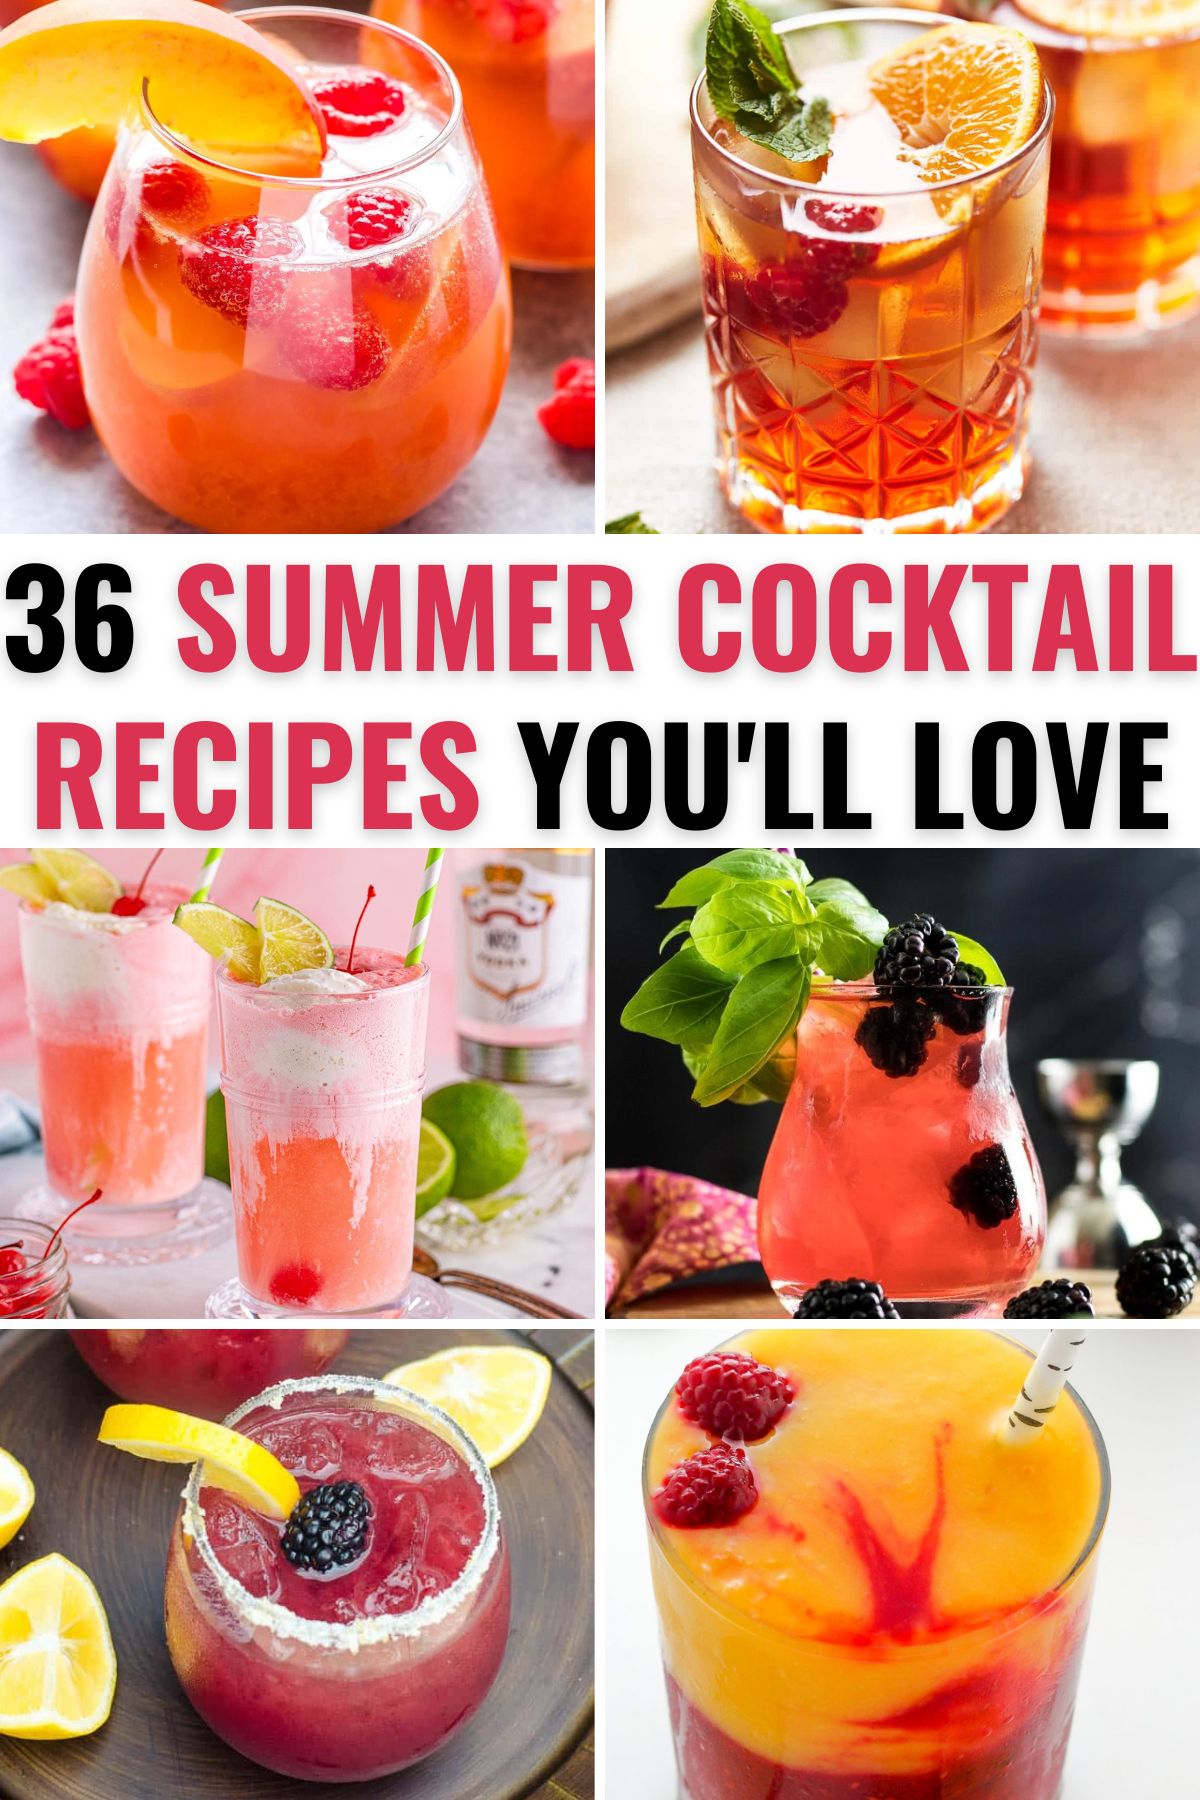 A collection of summer cocktail recipes